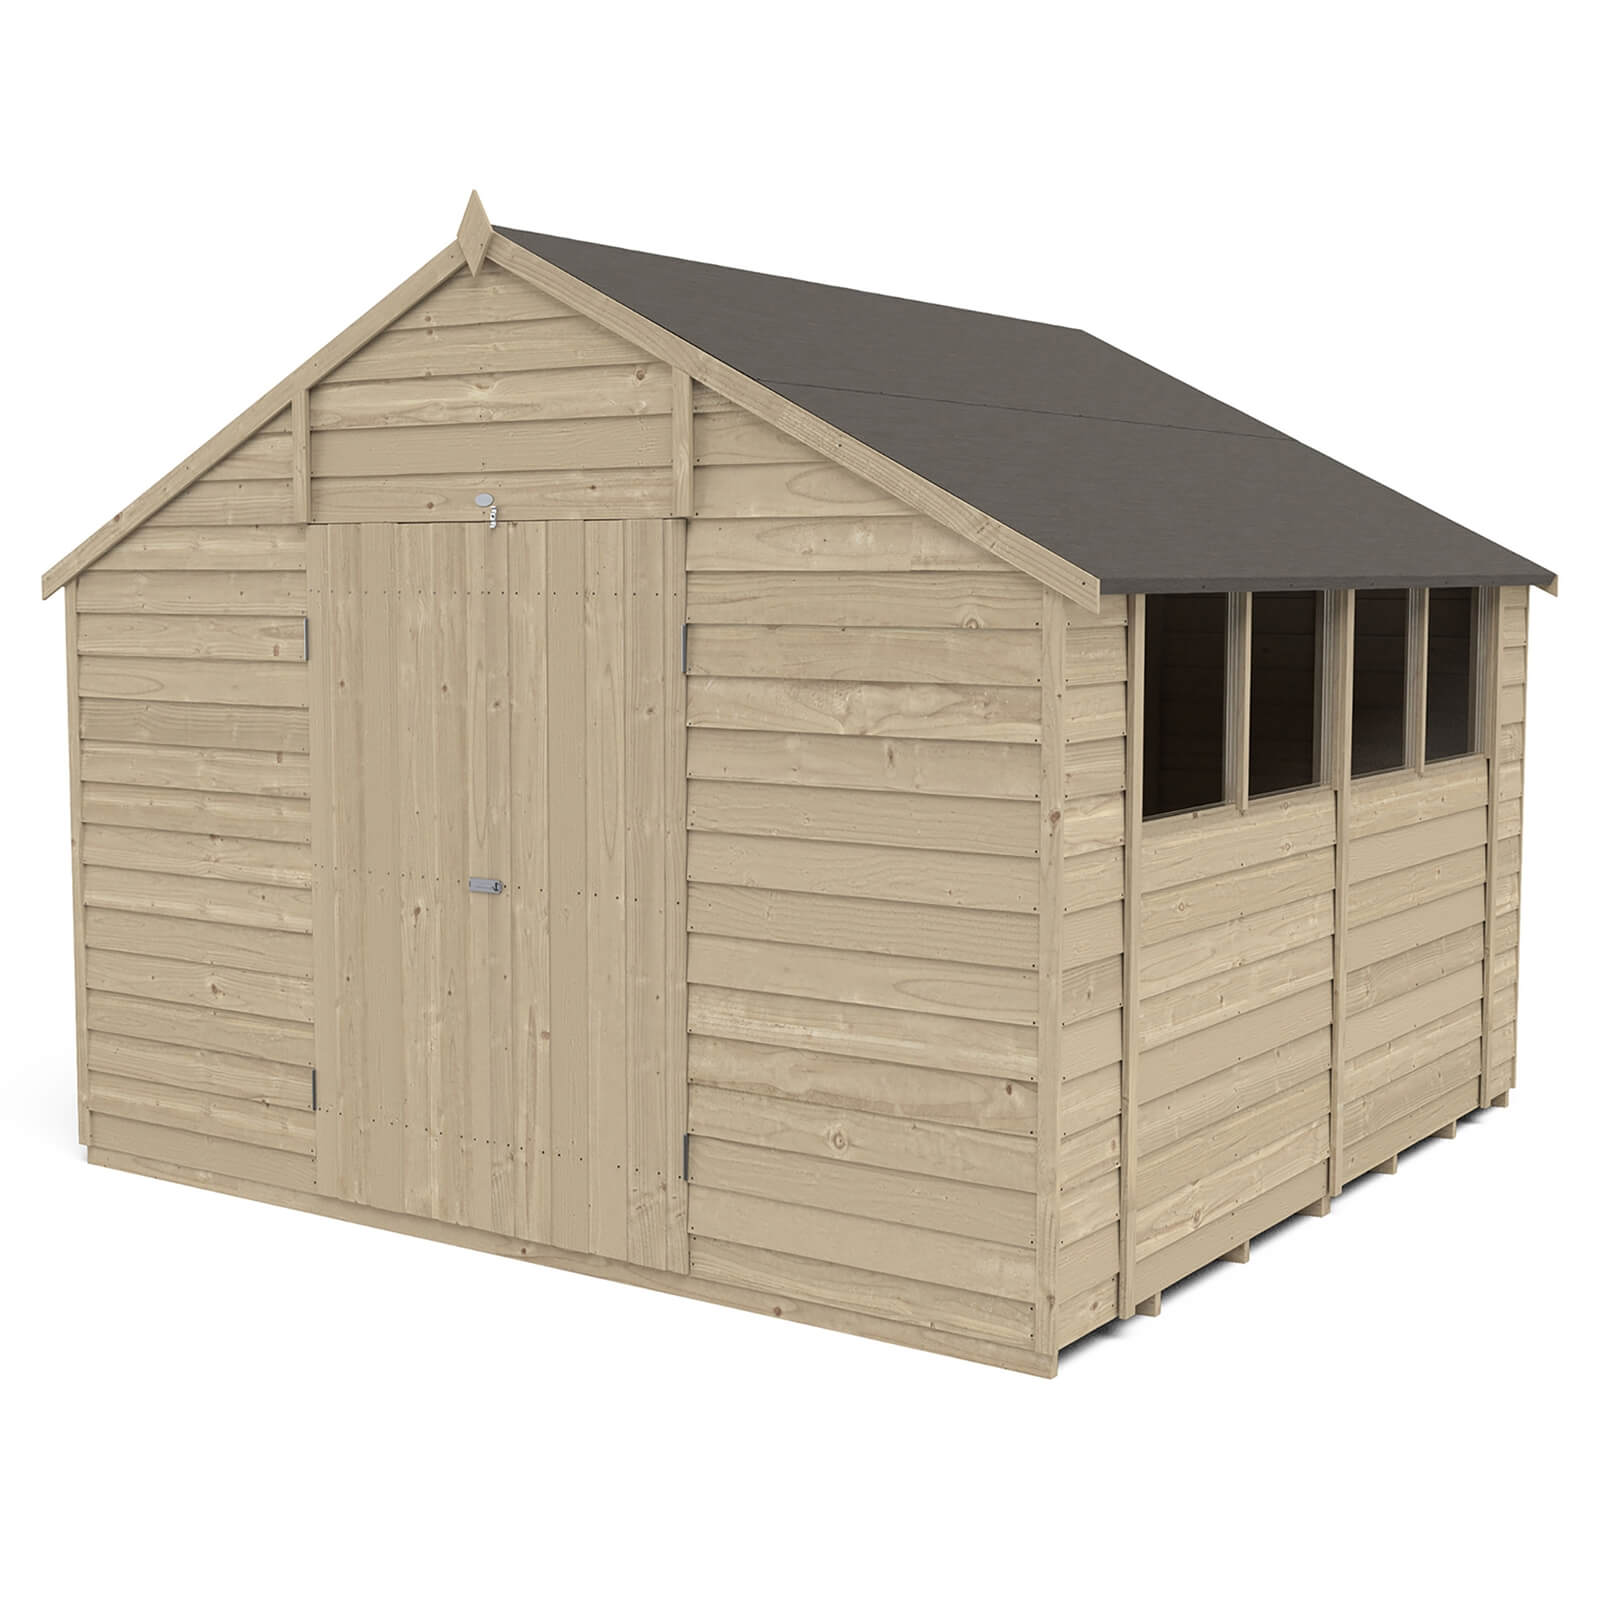 Forest 10 x 10ft Overlap Pressure Treated Double Door Apex Shed